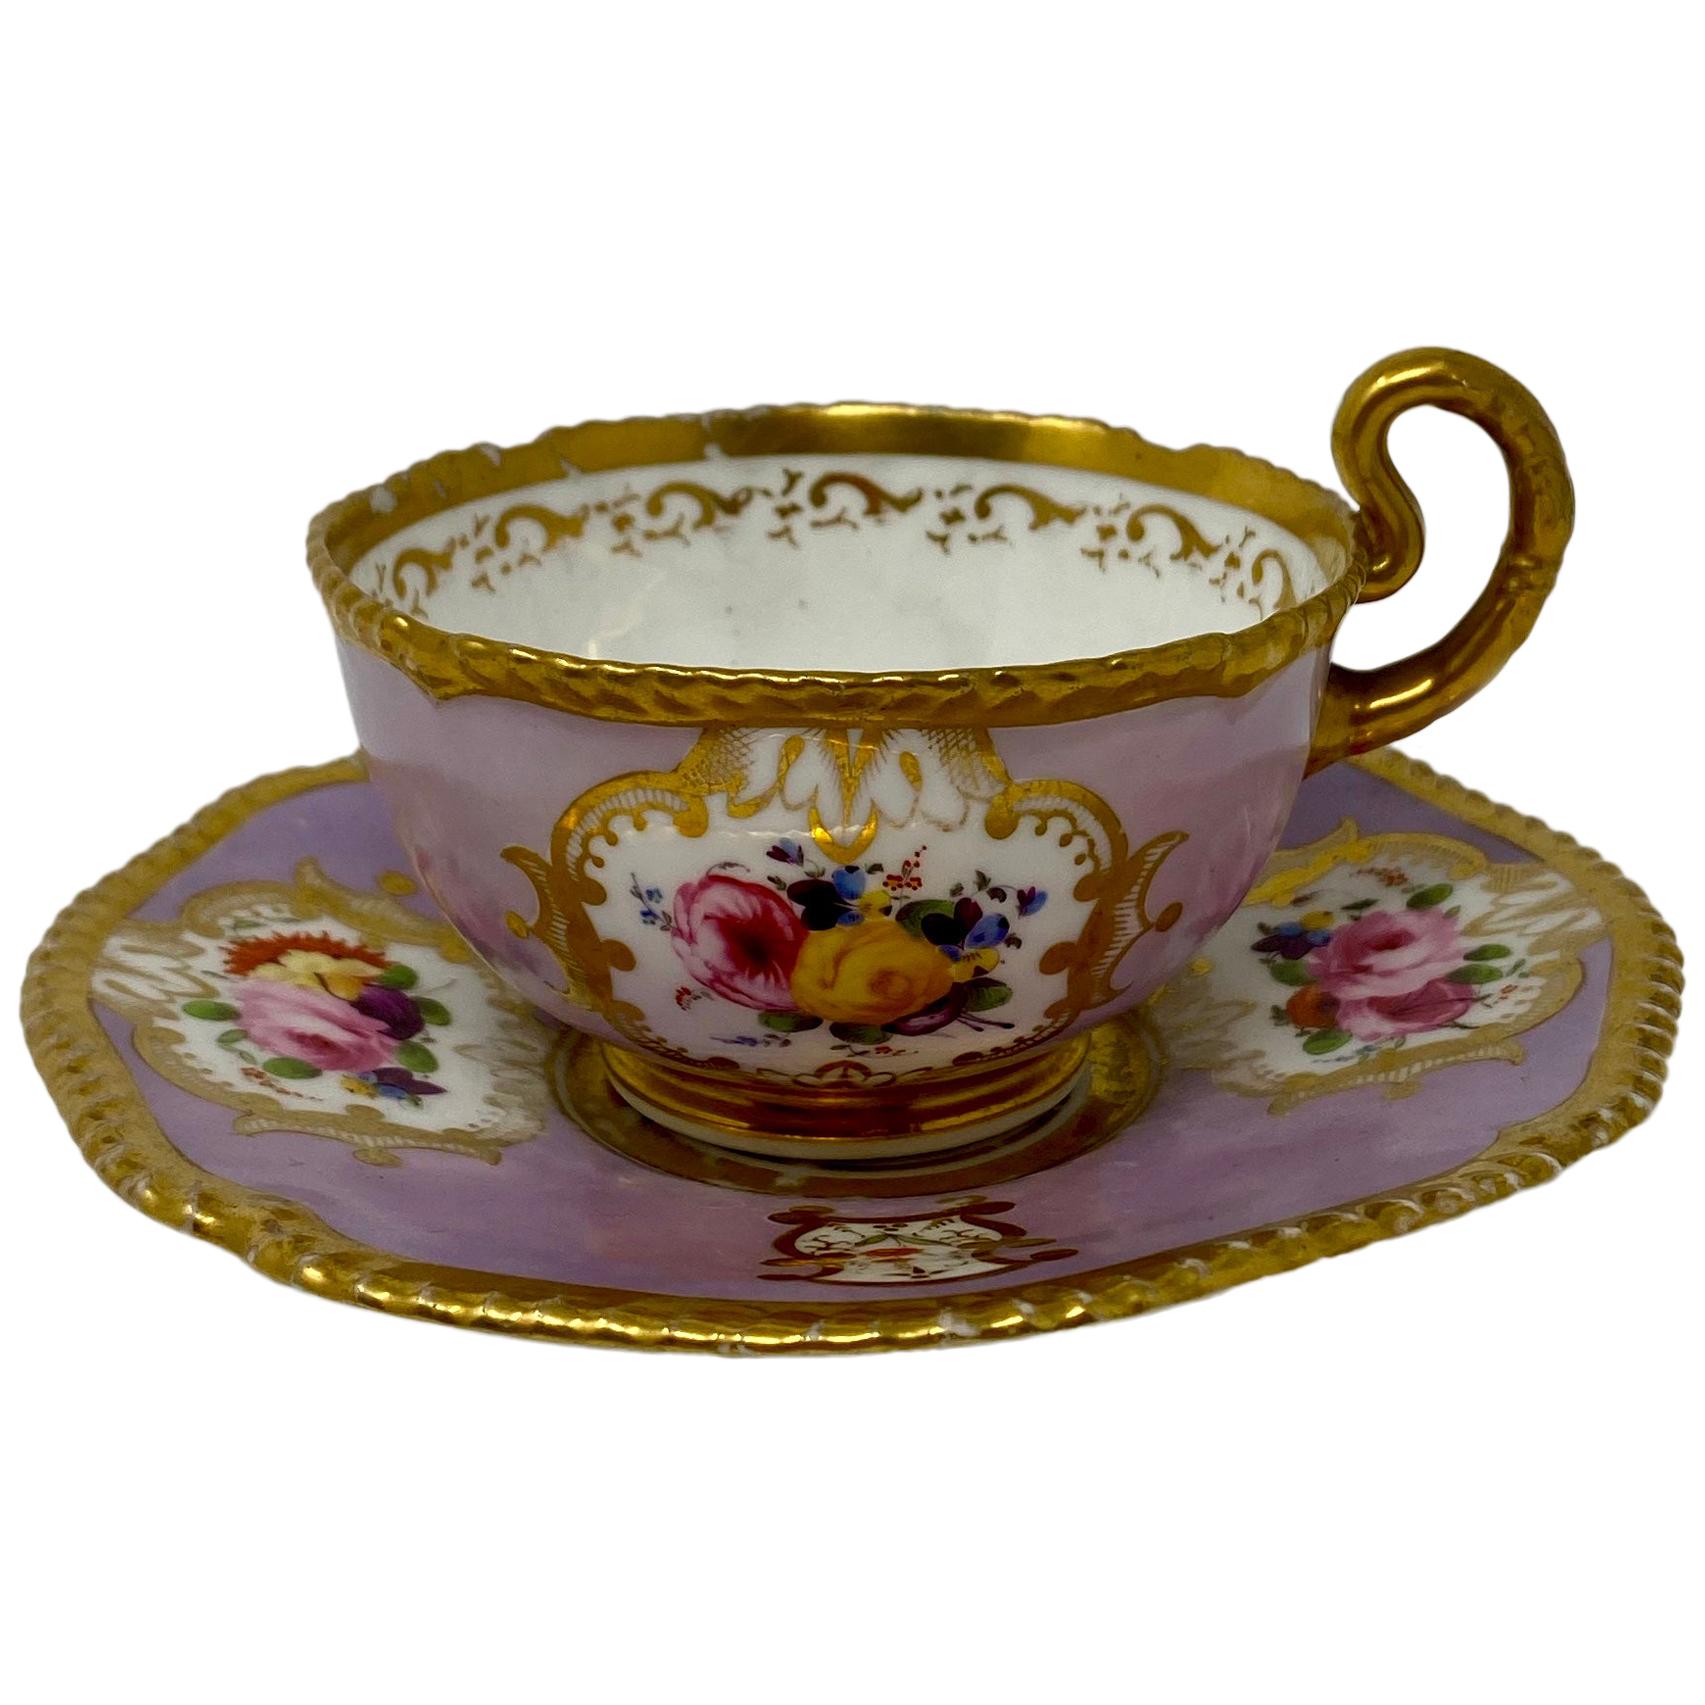 Antique Fine English China Tea and Coffee Cups and Saucers, circa 1860-1880